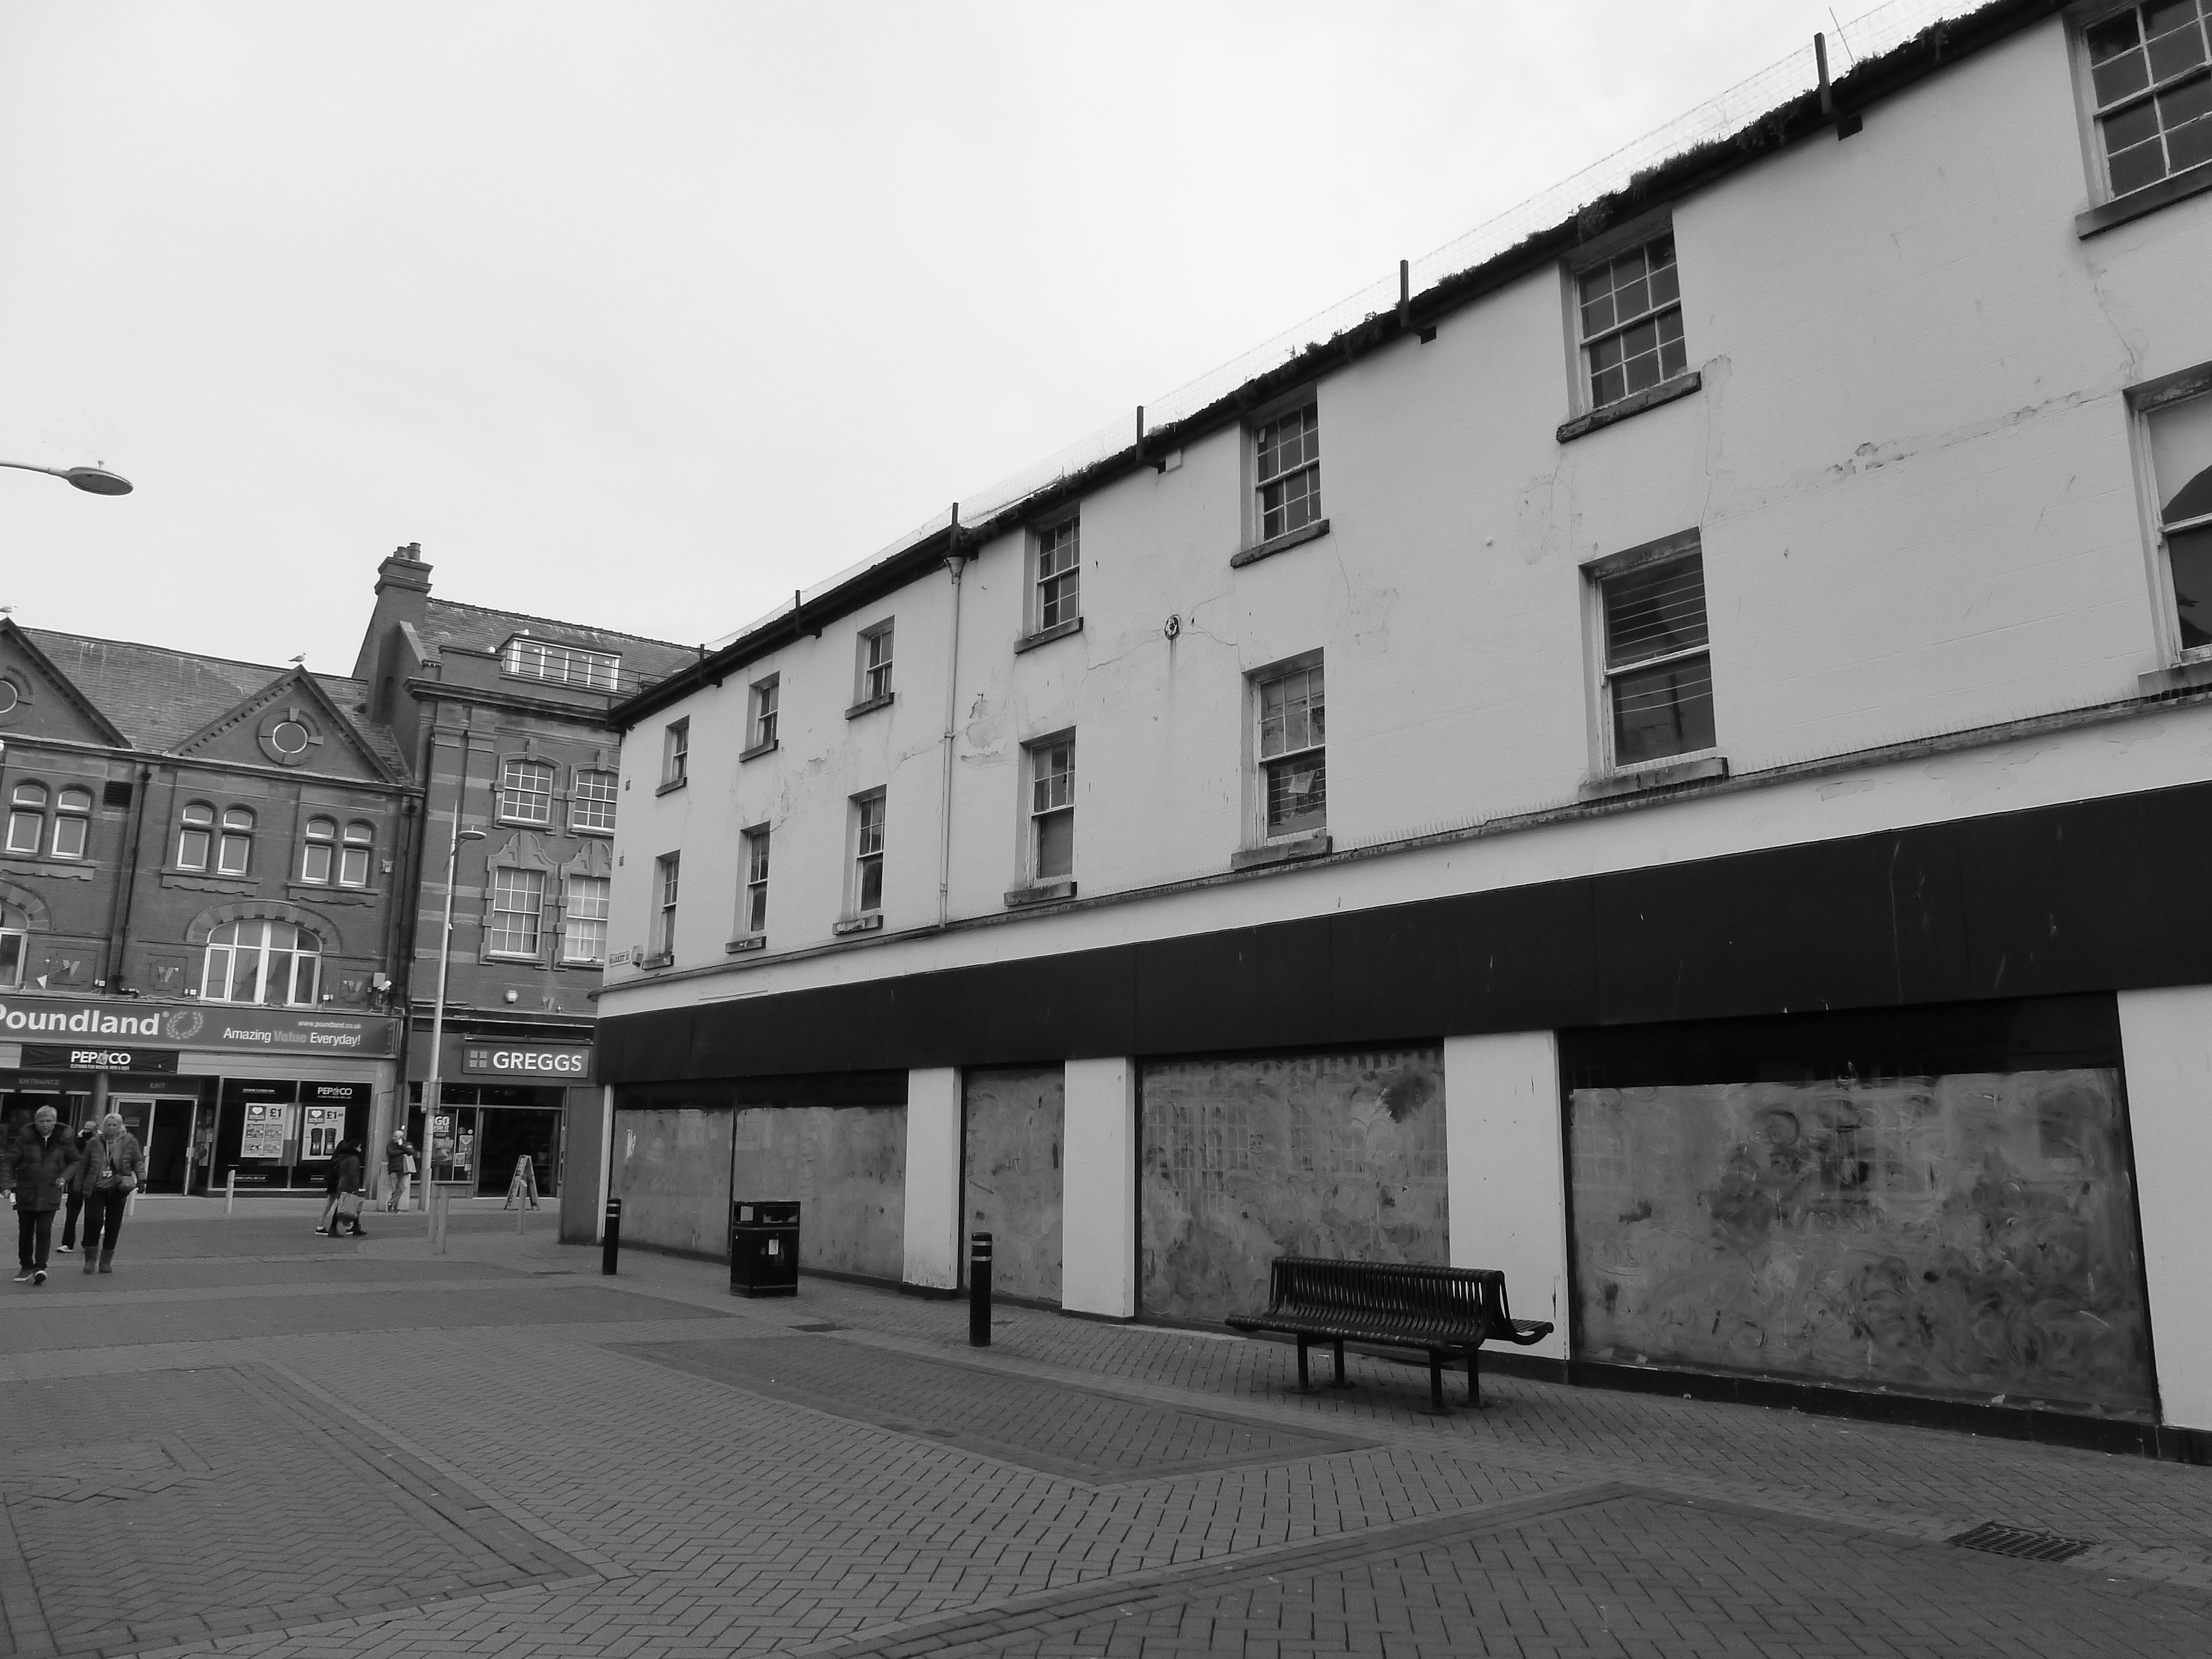 Rhyl, a byword for deprivation, crime and urban decay